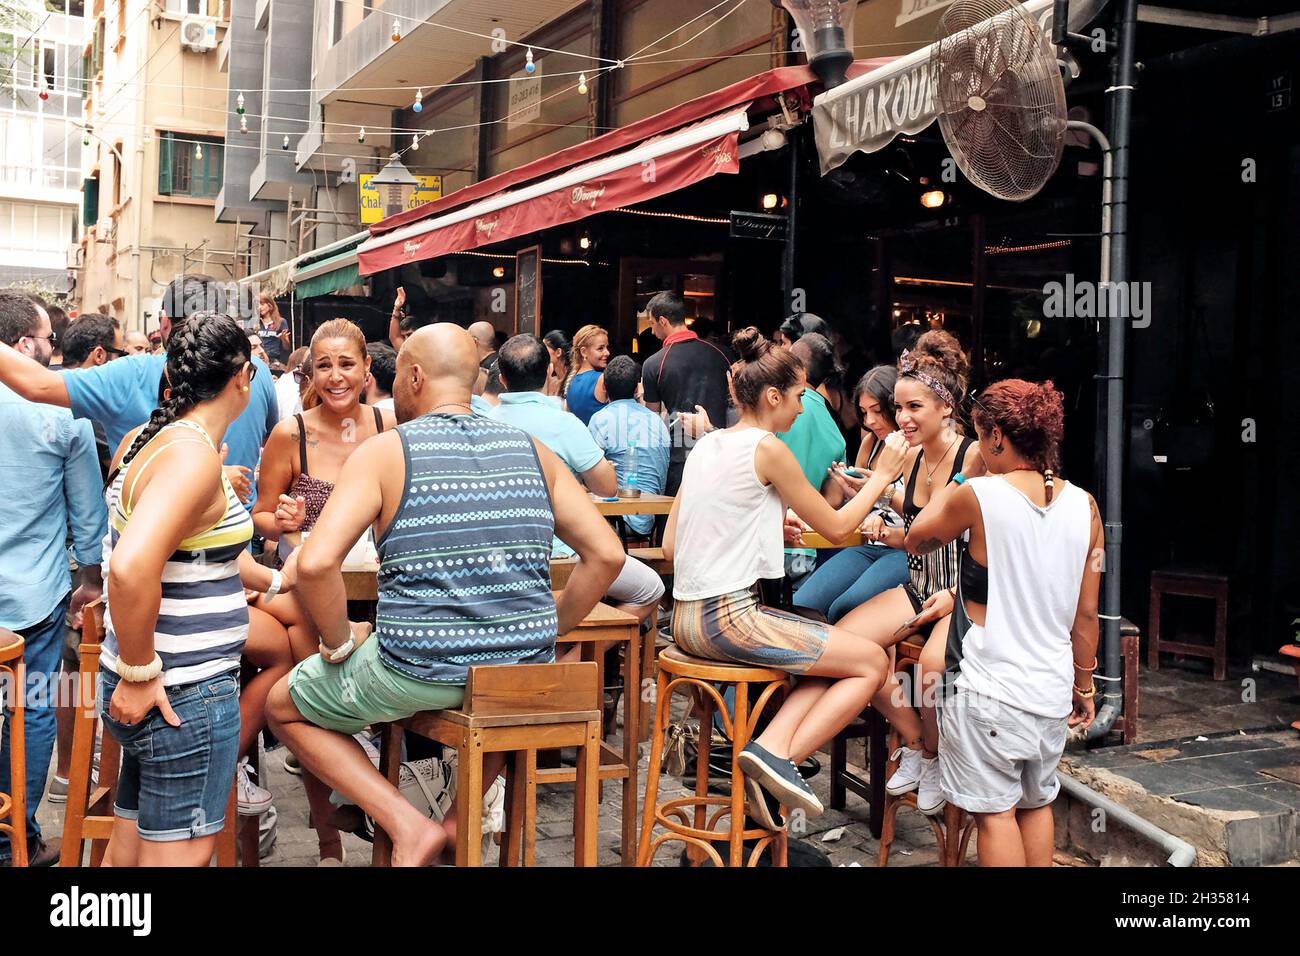 An outdoor street party scene in the bustling Hamra neighborhood of Beirut, Lebanon.  The area is filled with bars and restaurants catering to locals, expats, and students at major universities in the area. Stock Photo